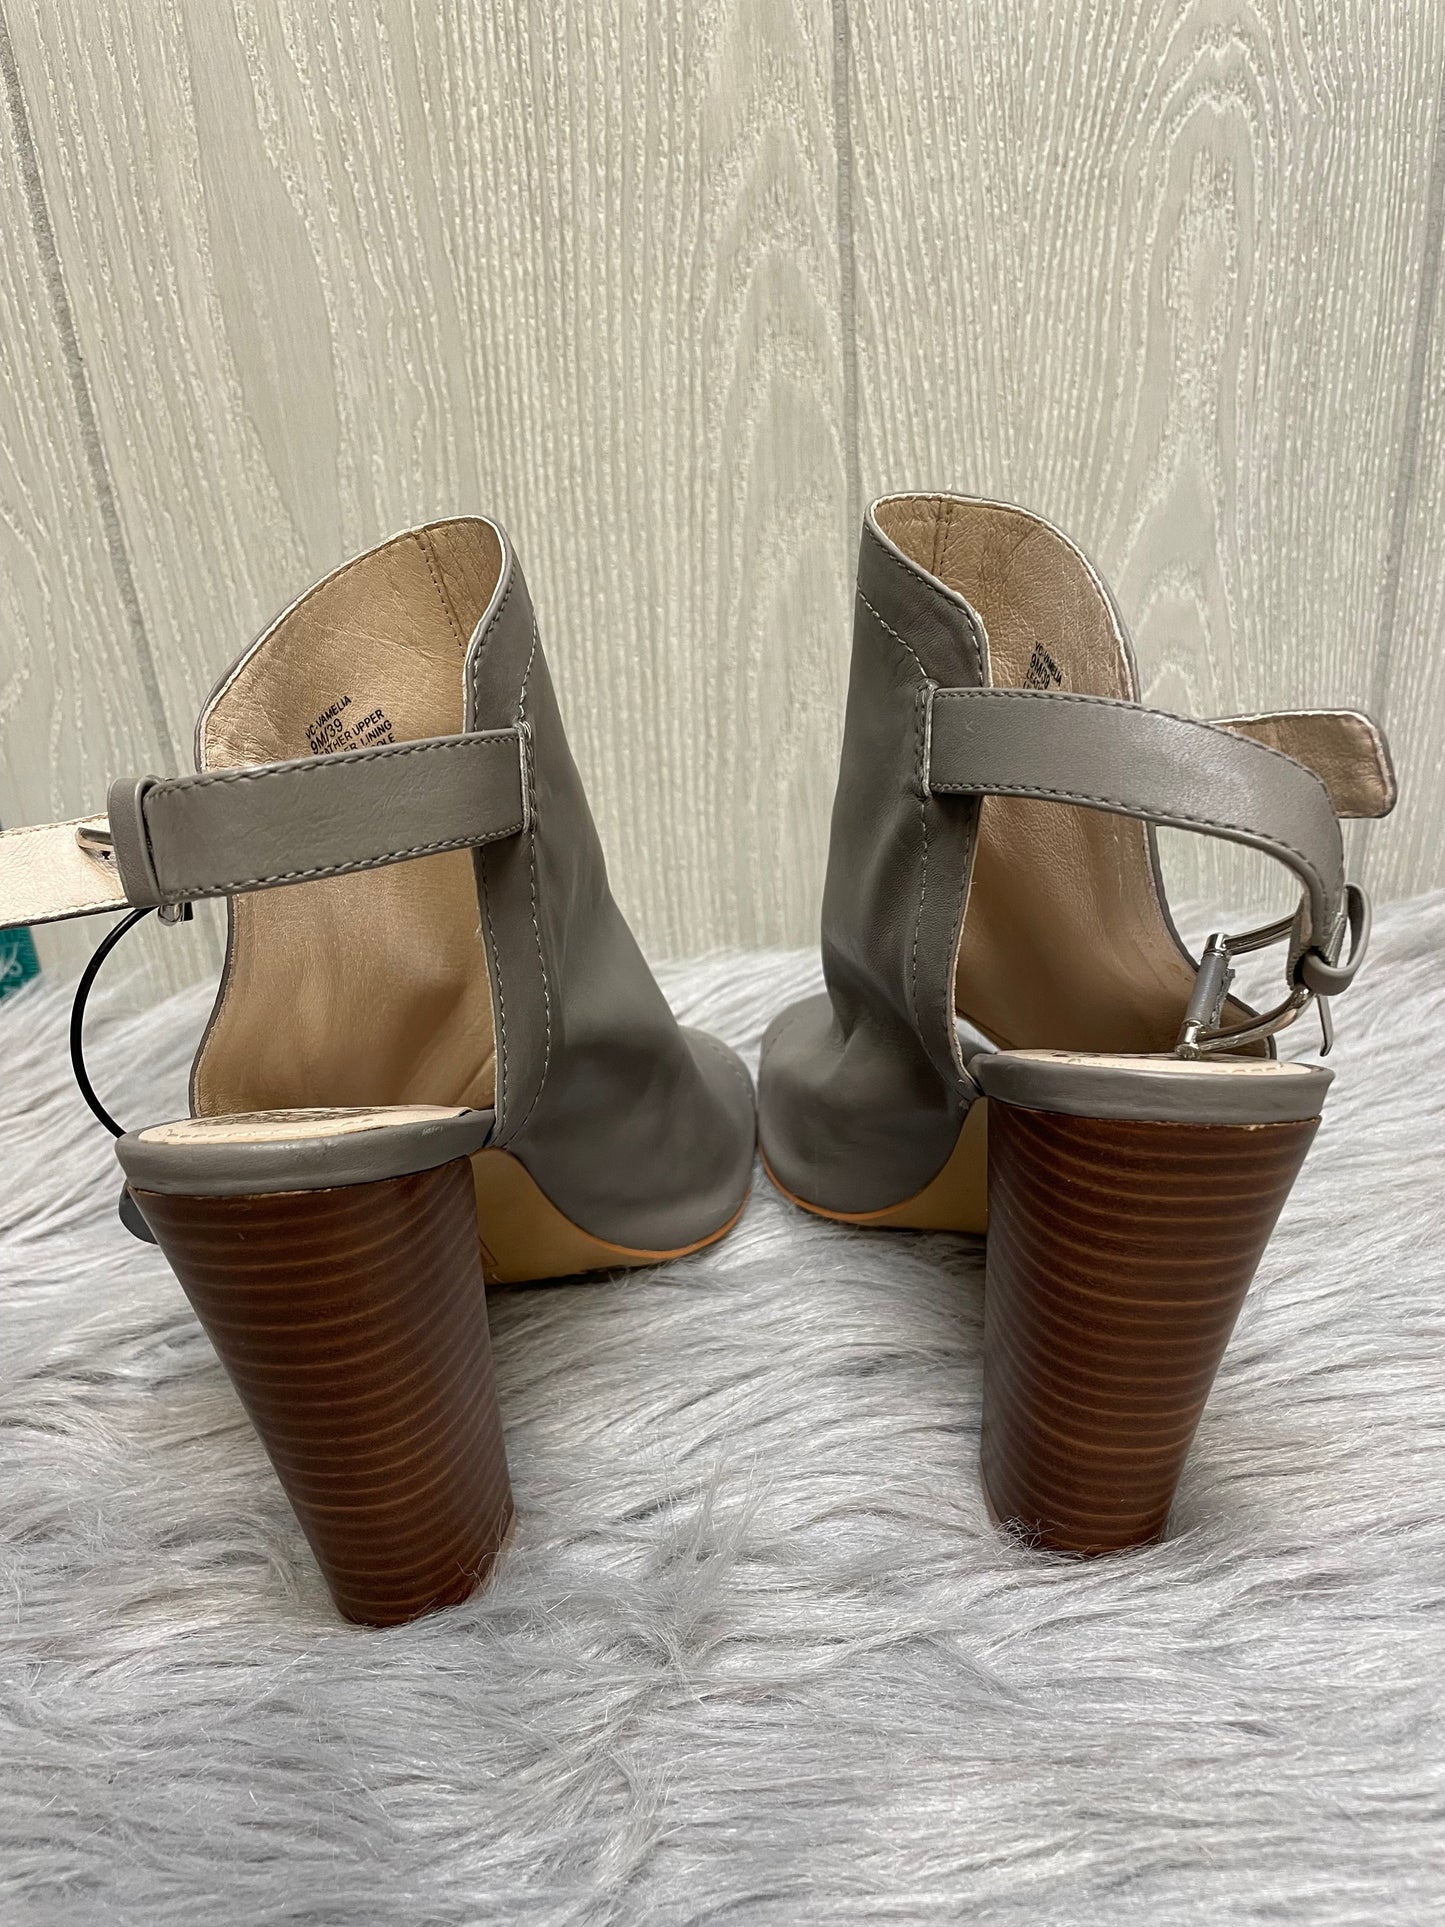 Grey Shoes Heels Block Vince Camuto, Size 9